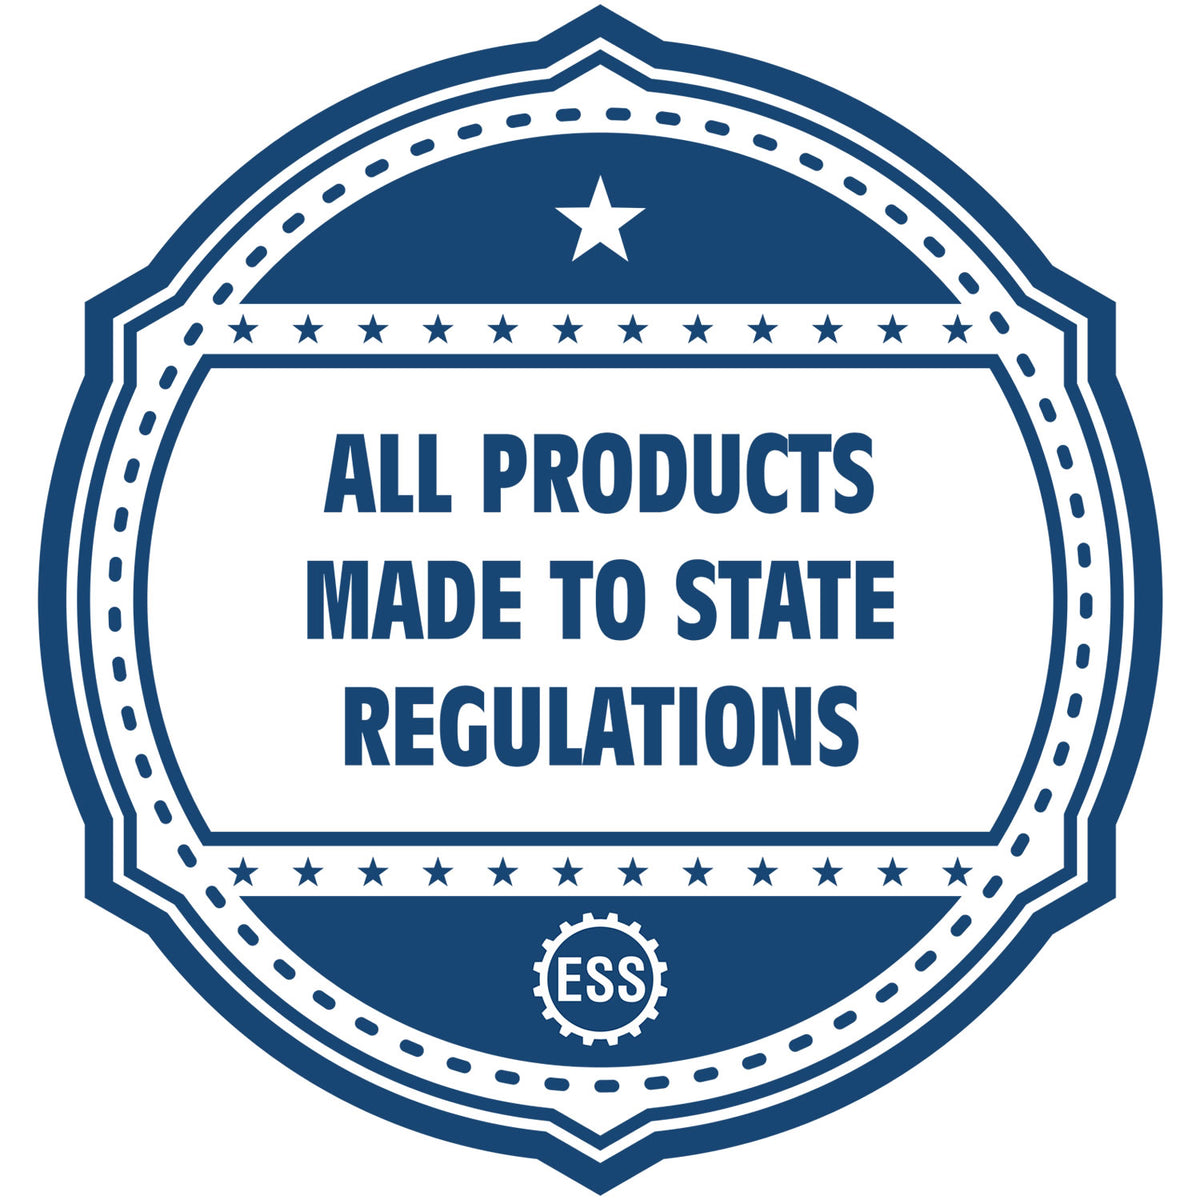 An icon or badge element for the Self-Inking State Seal North Carolina Notary Stamp showing that this product is made in compliance with state regulations.